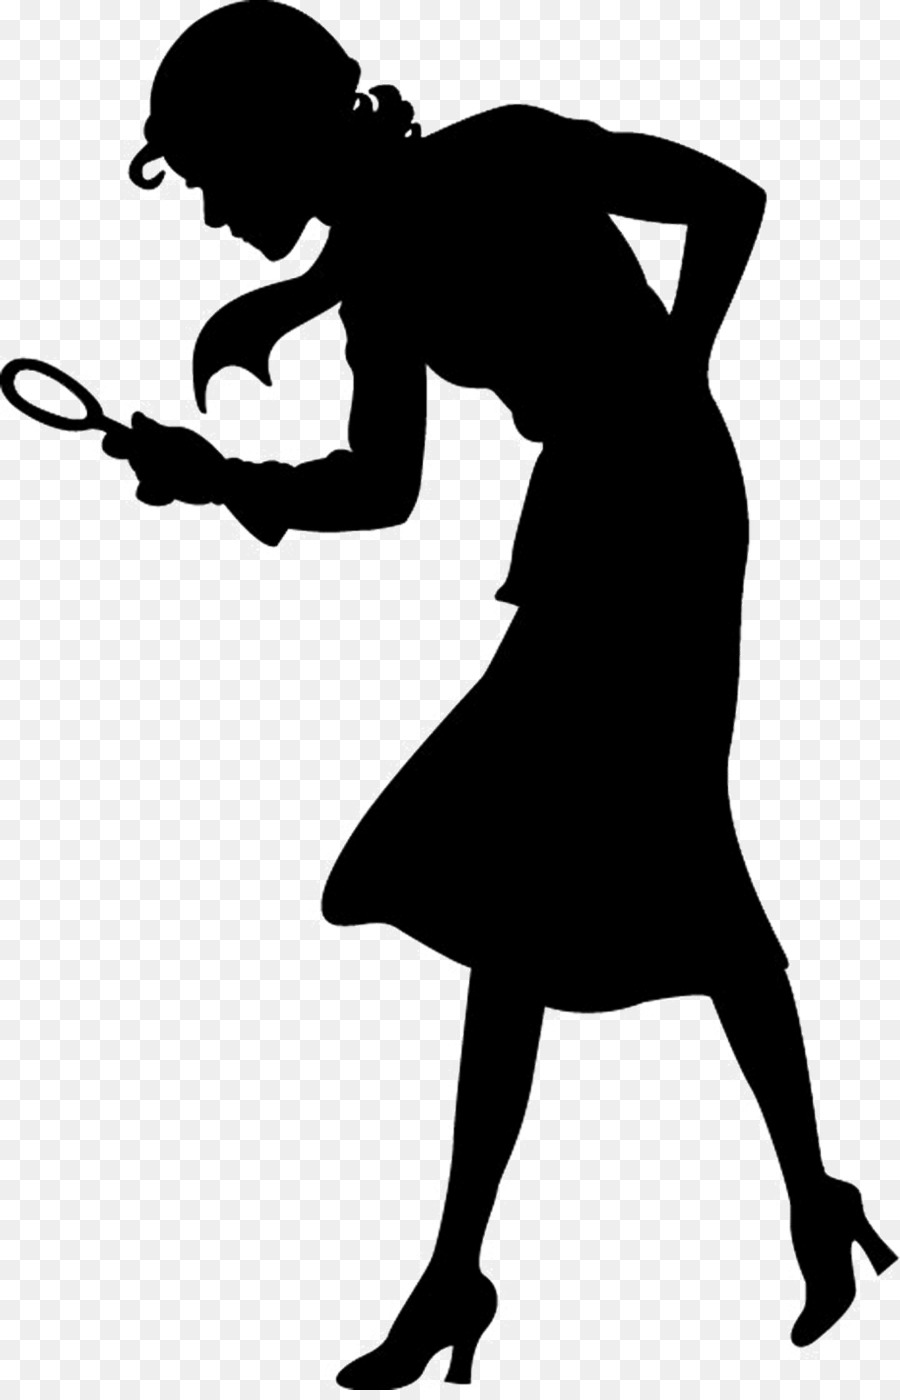 Nancy Drew The Sign of the Twisted Candles The Bungalow Mystery Silhouette Clip art - Detective Silhouette png download - 1036*1600 - Free Transparent Nancy Drew png Download.